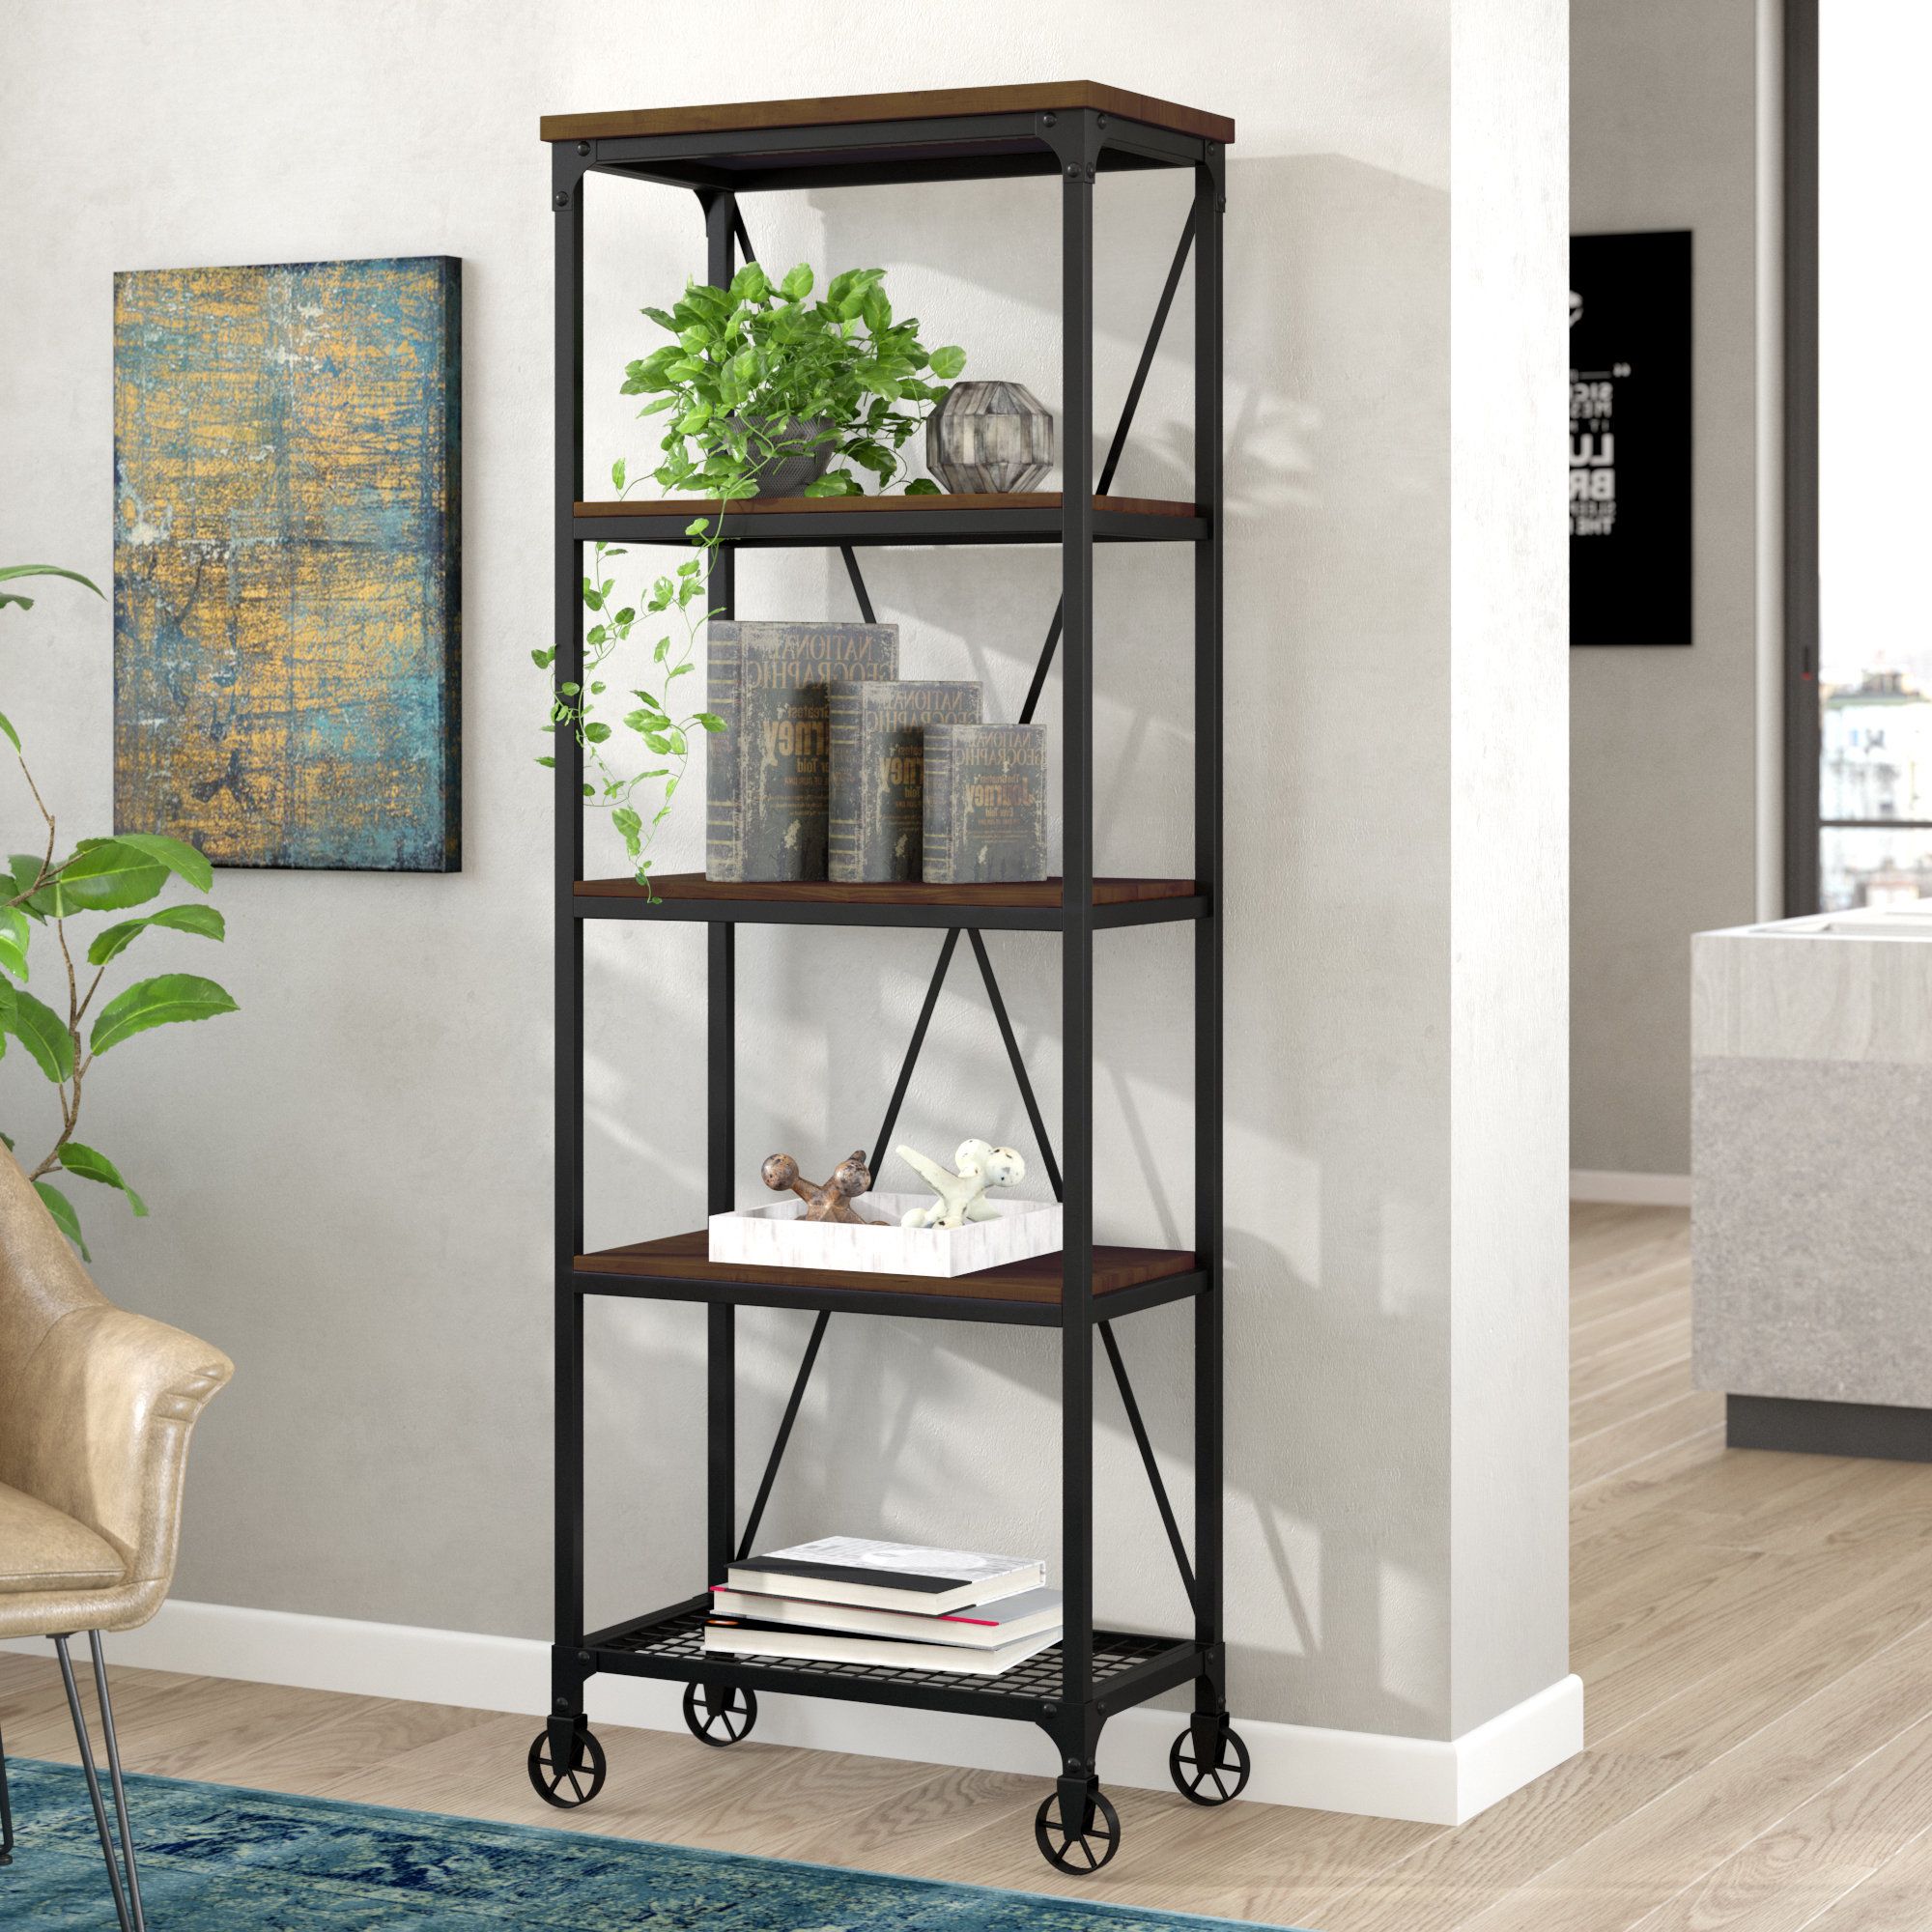 Most Popular Rocklin Etagere Bookcases Regarding Rocklin Etagere Bookcase (View 1 of 20)